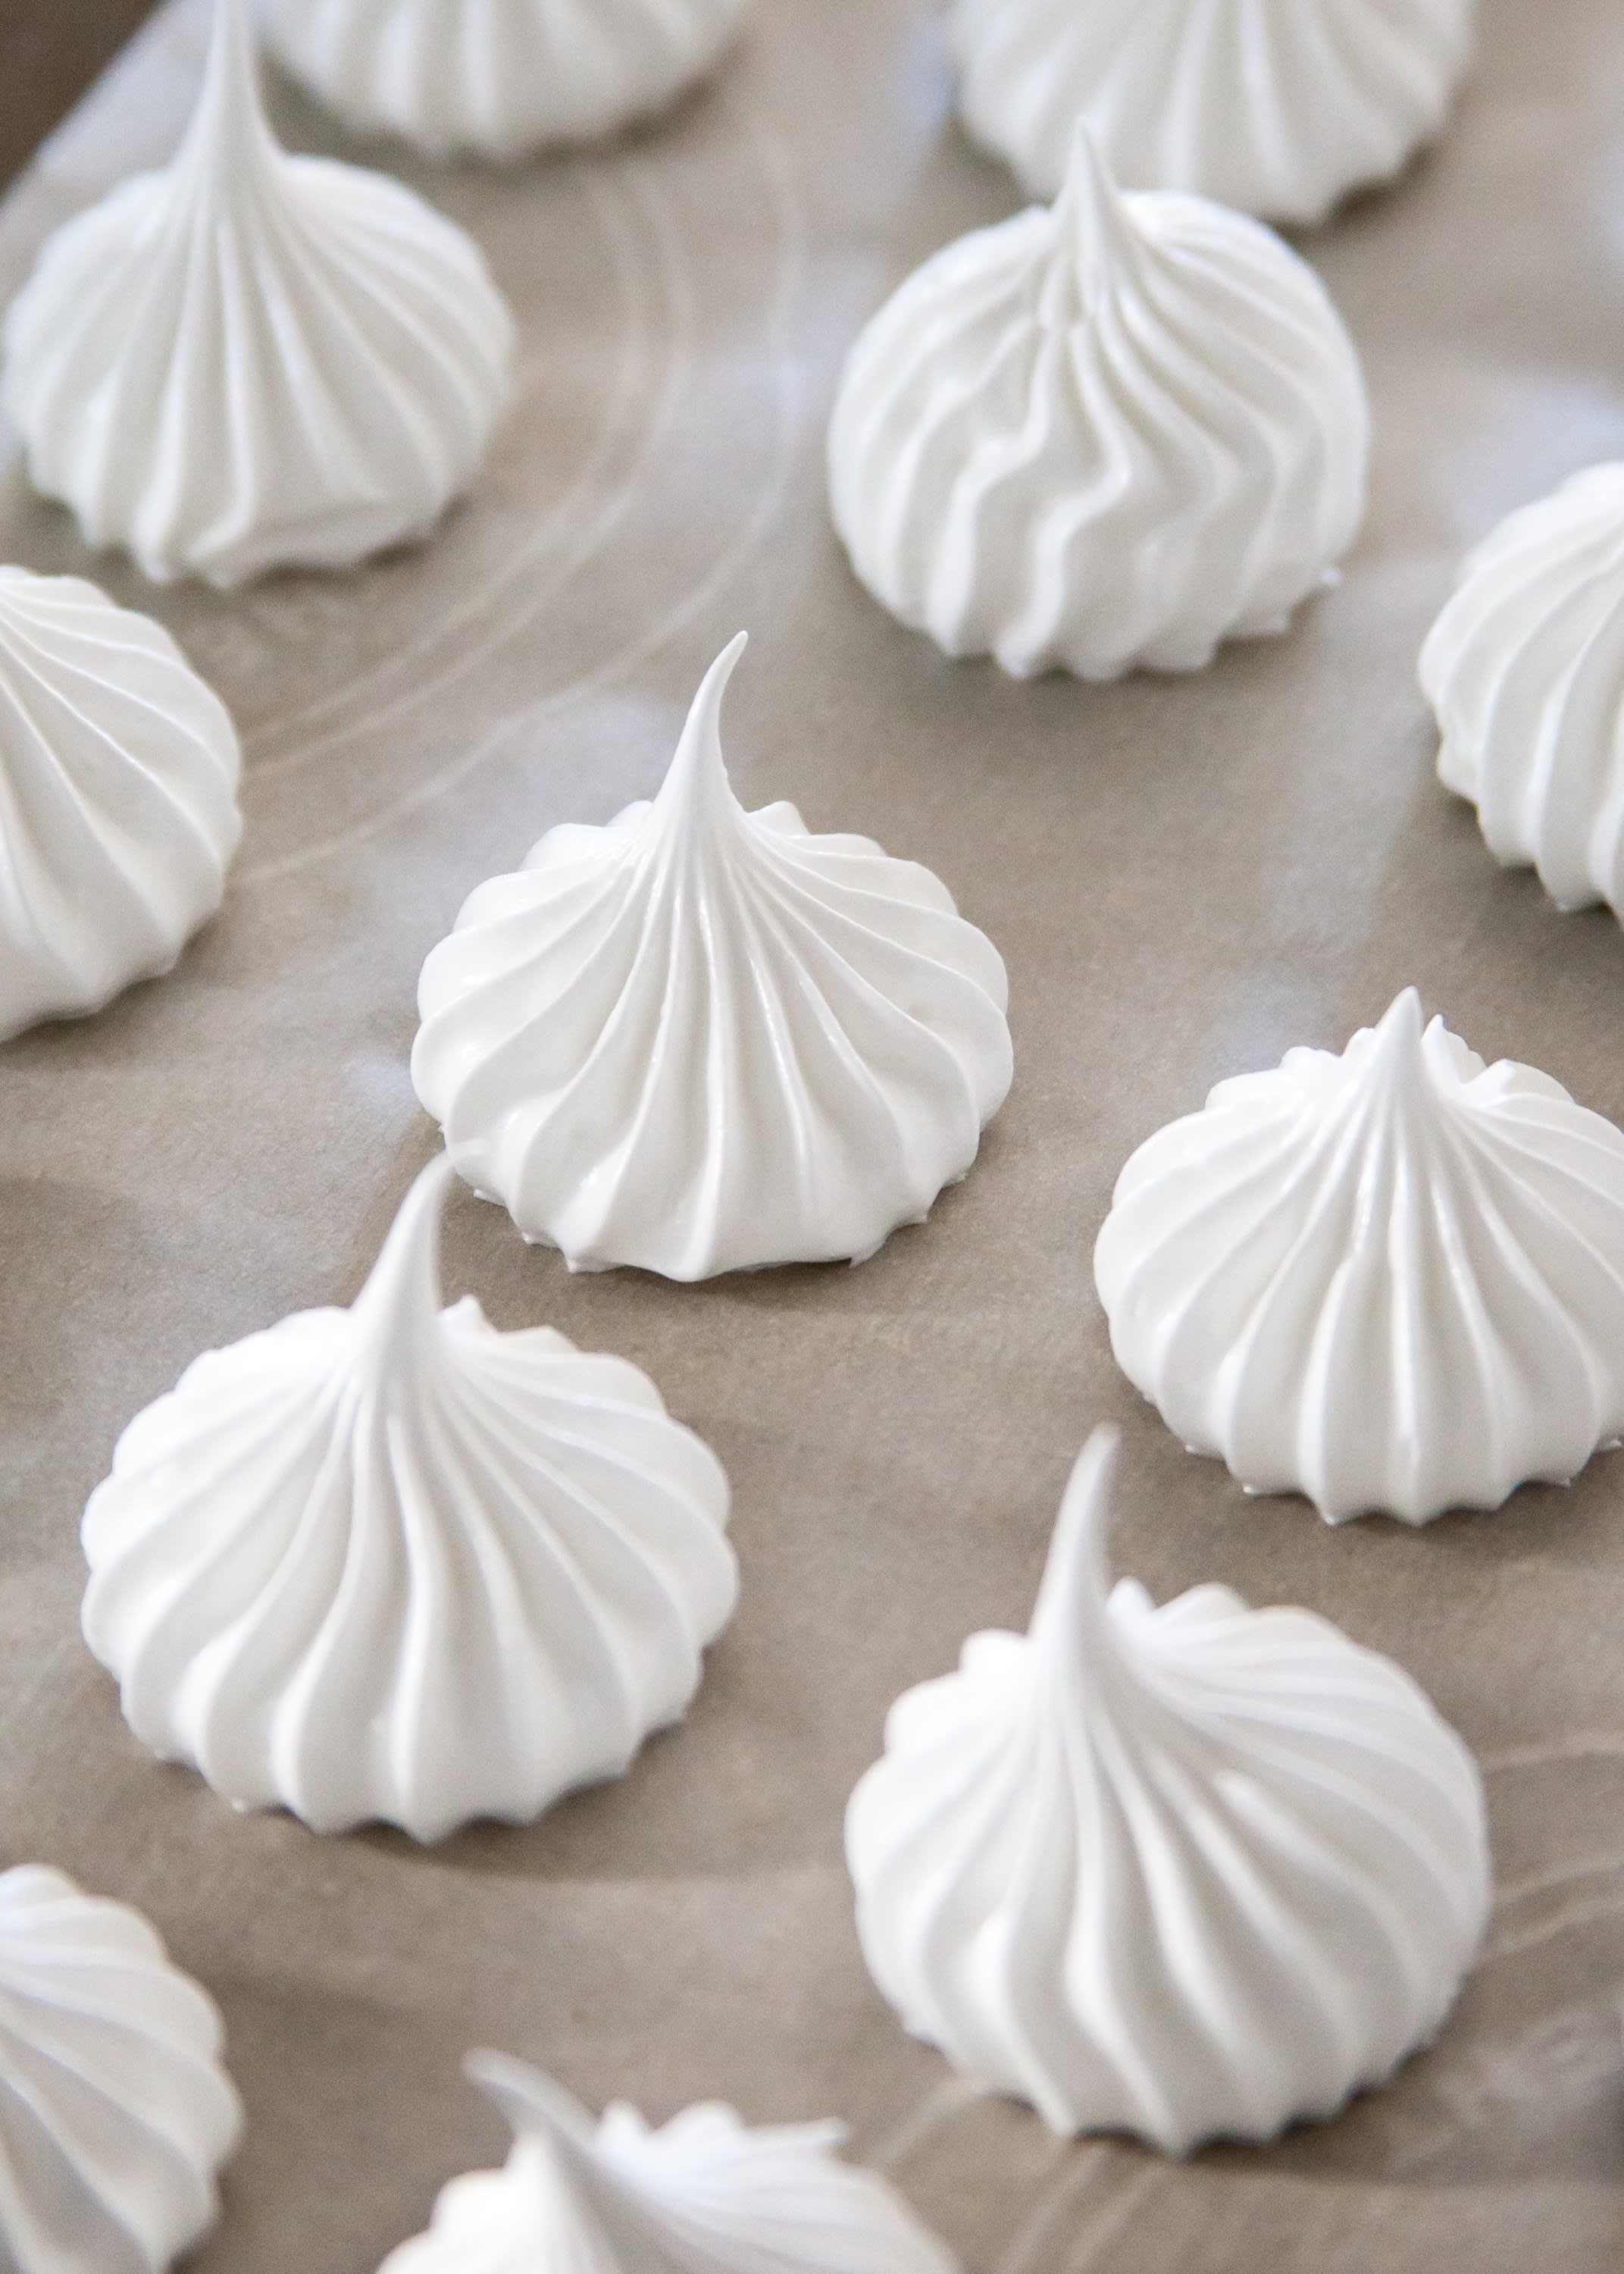 How To Make French Meringue | Kitchn